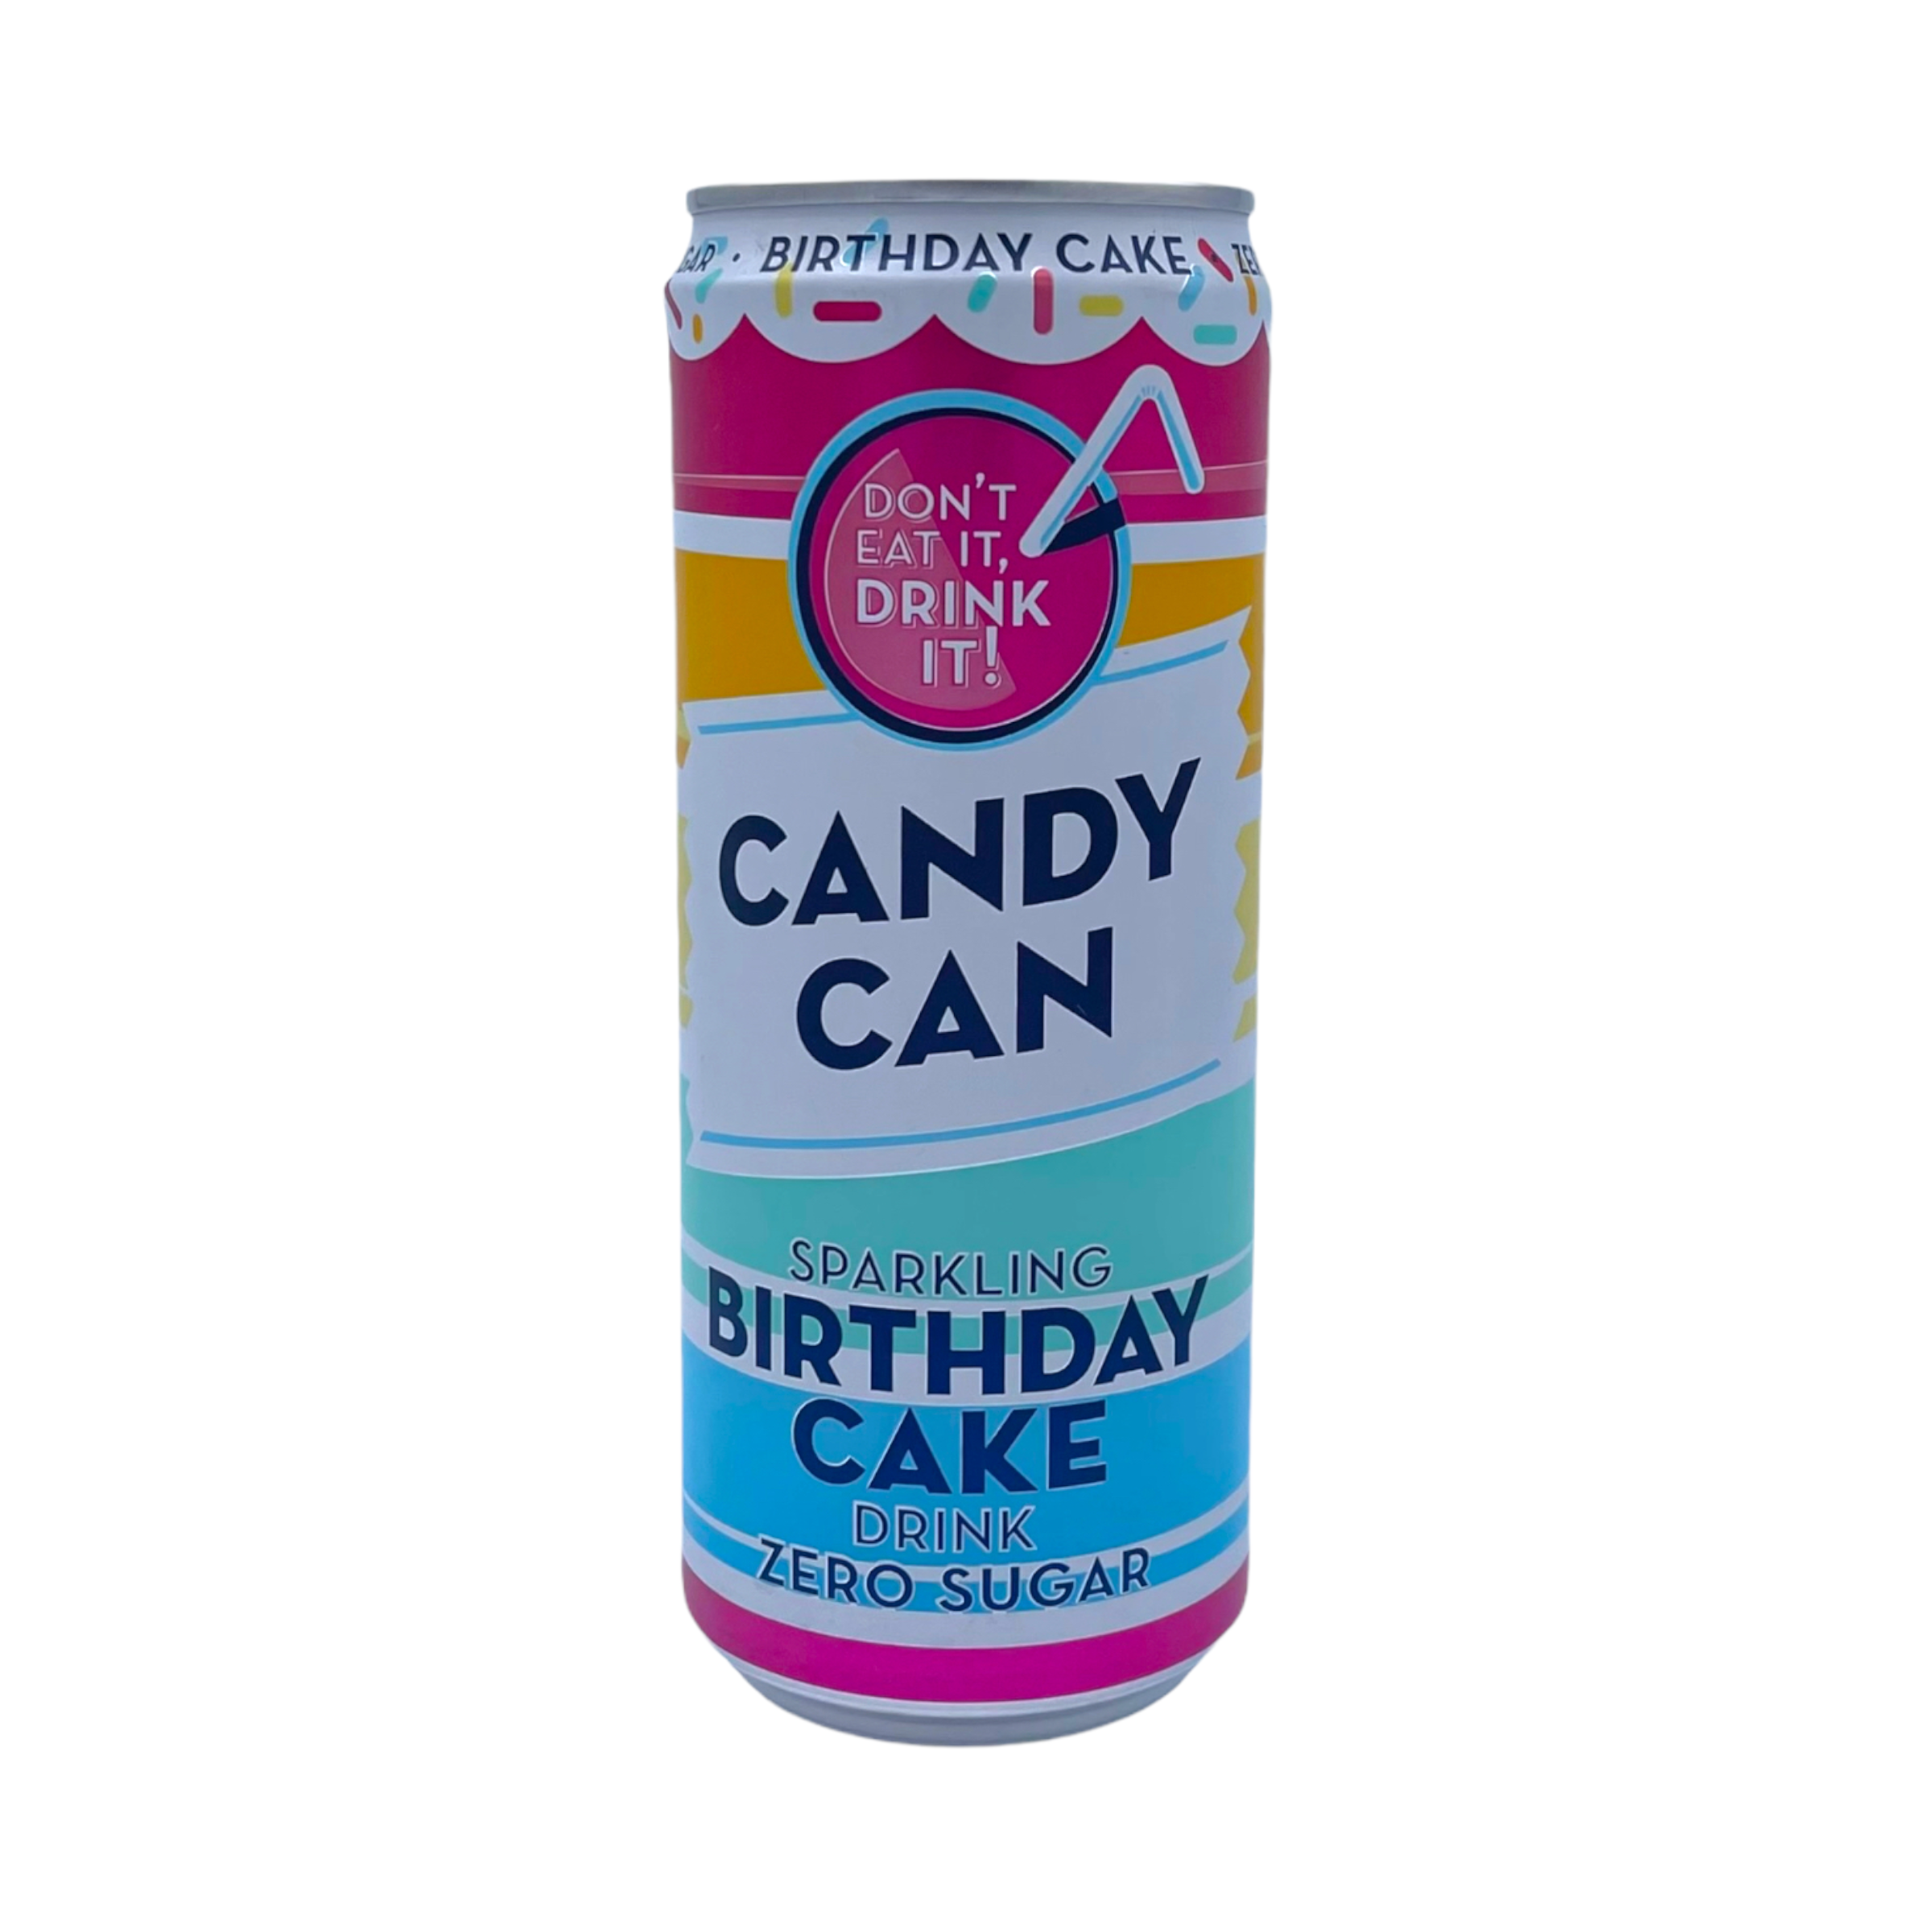 Candy Can Birthday Cake